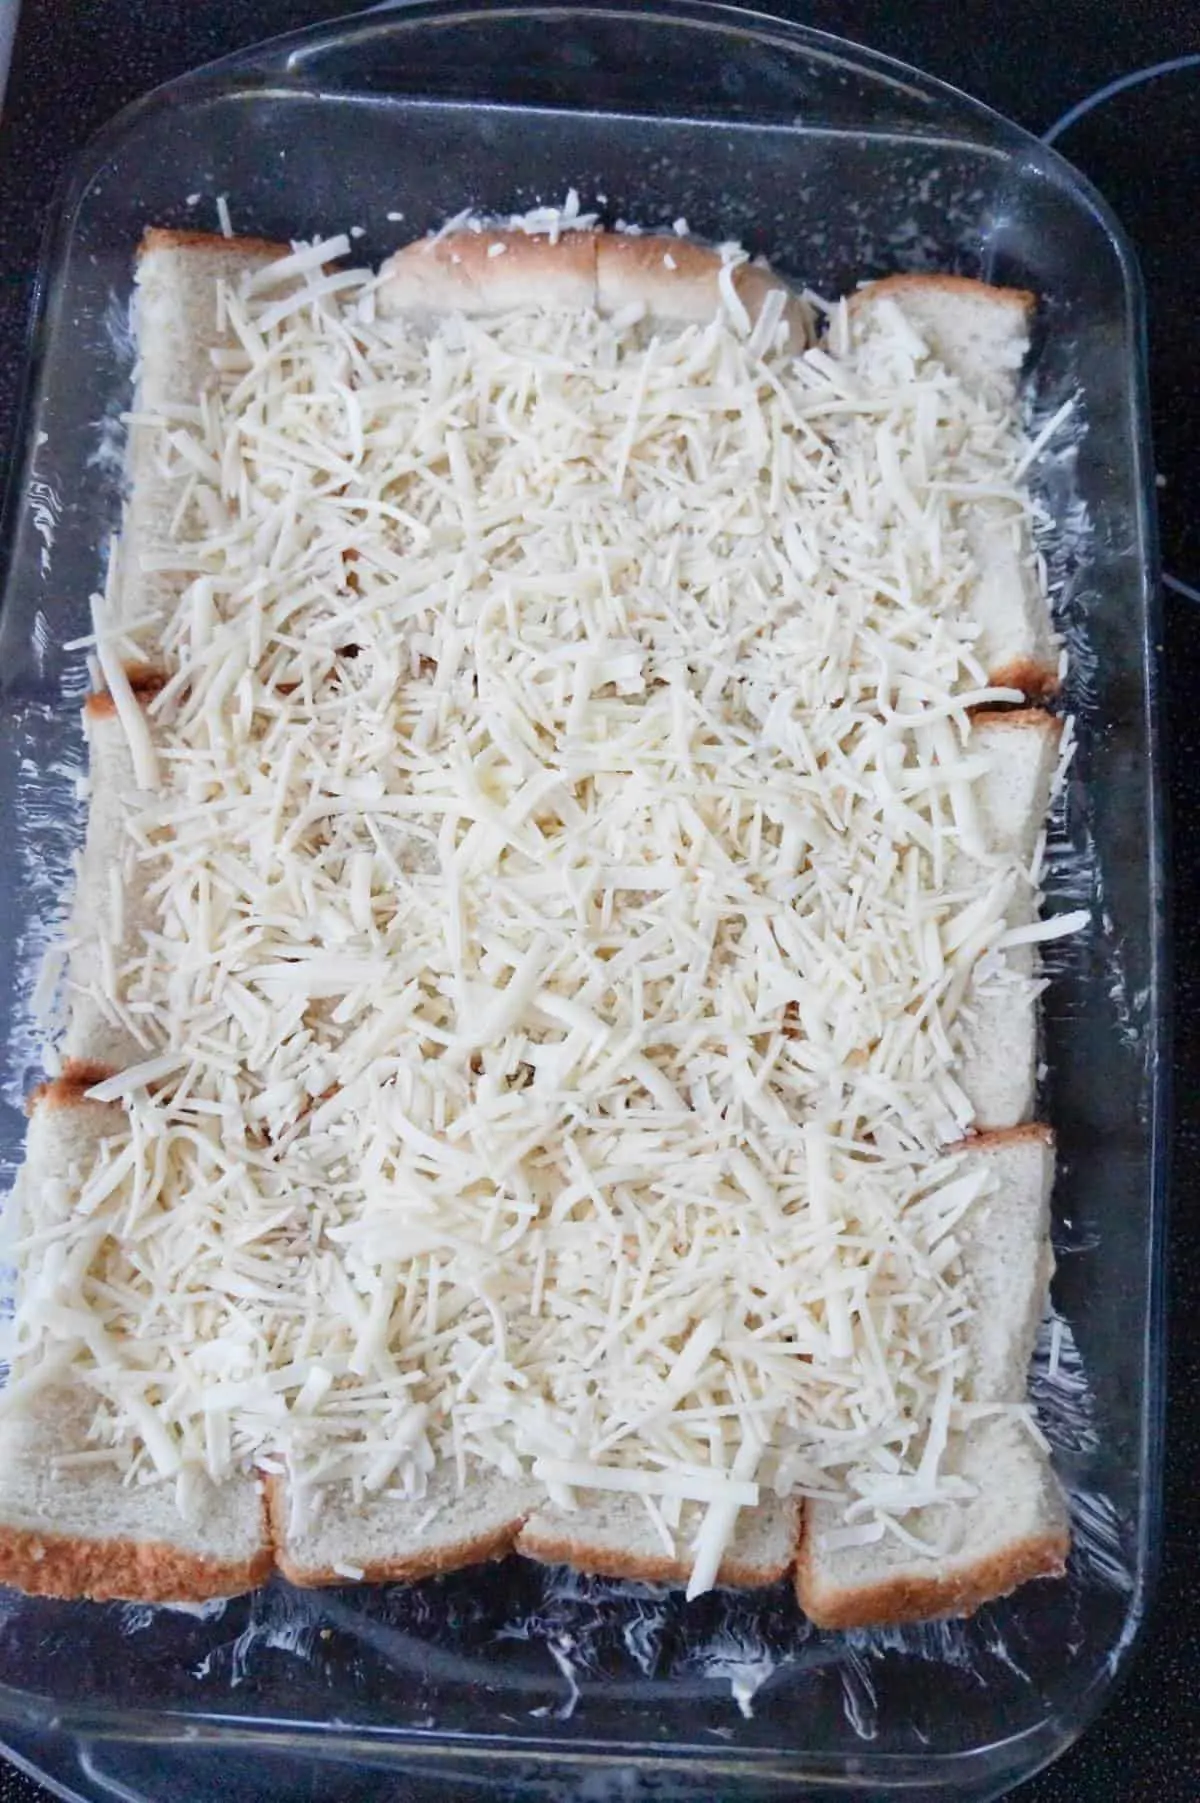 shredded cheese on top of bread in a baking dish